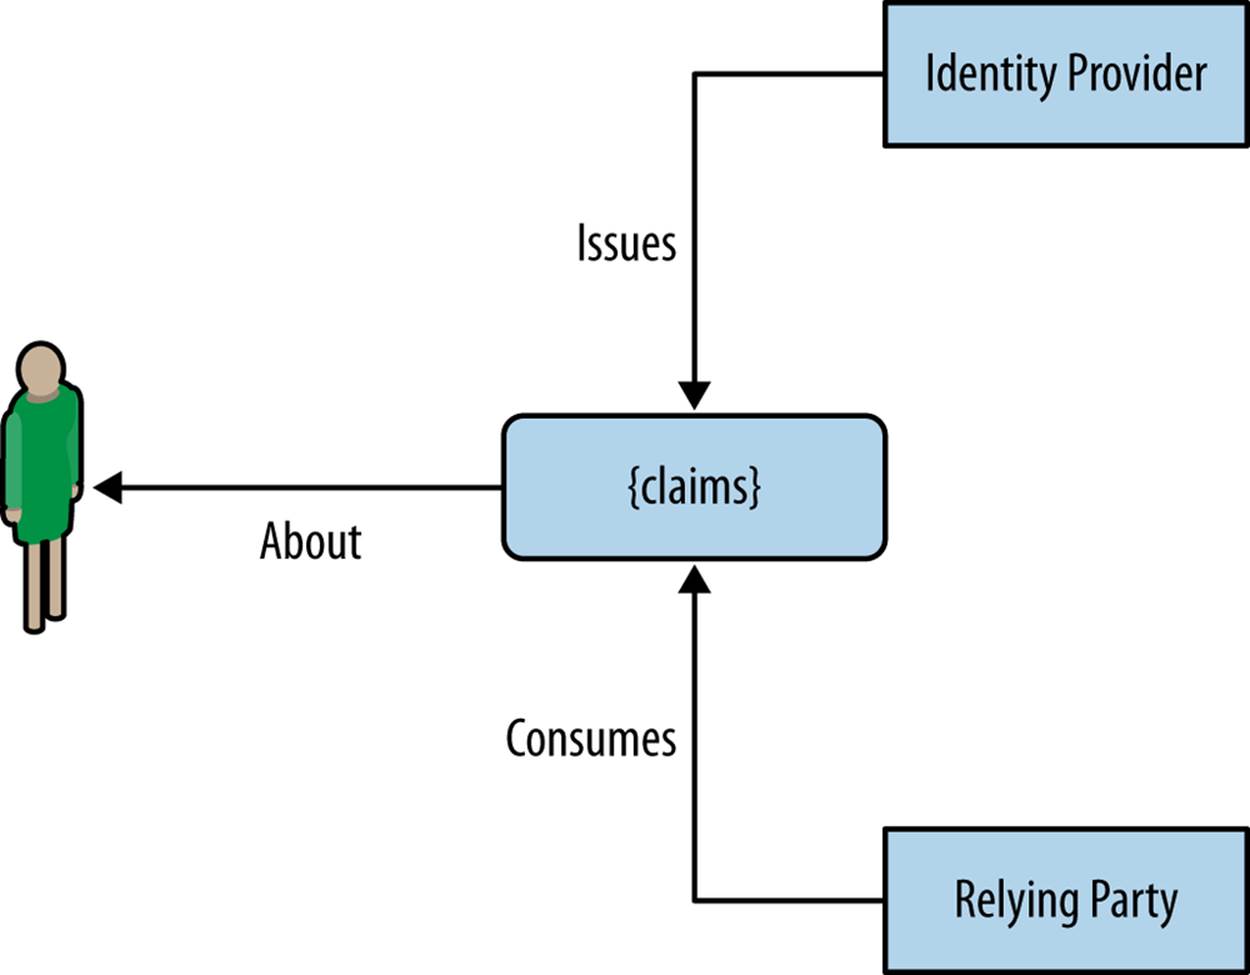 Identity providers and relying parties